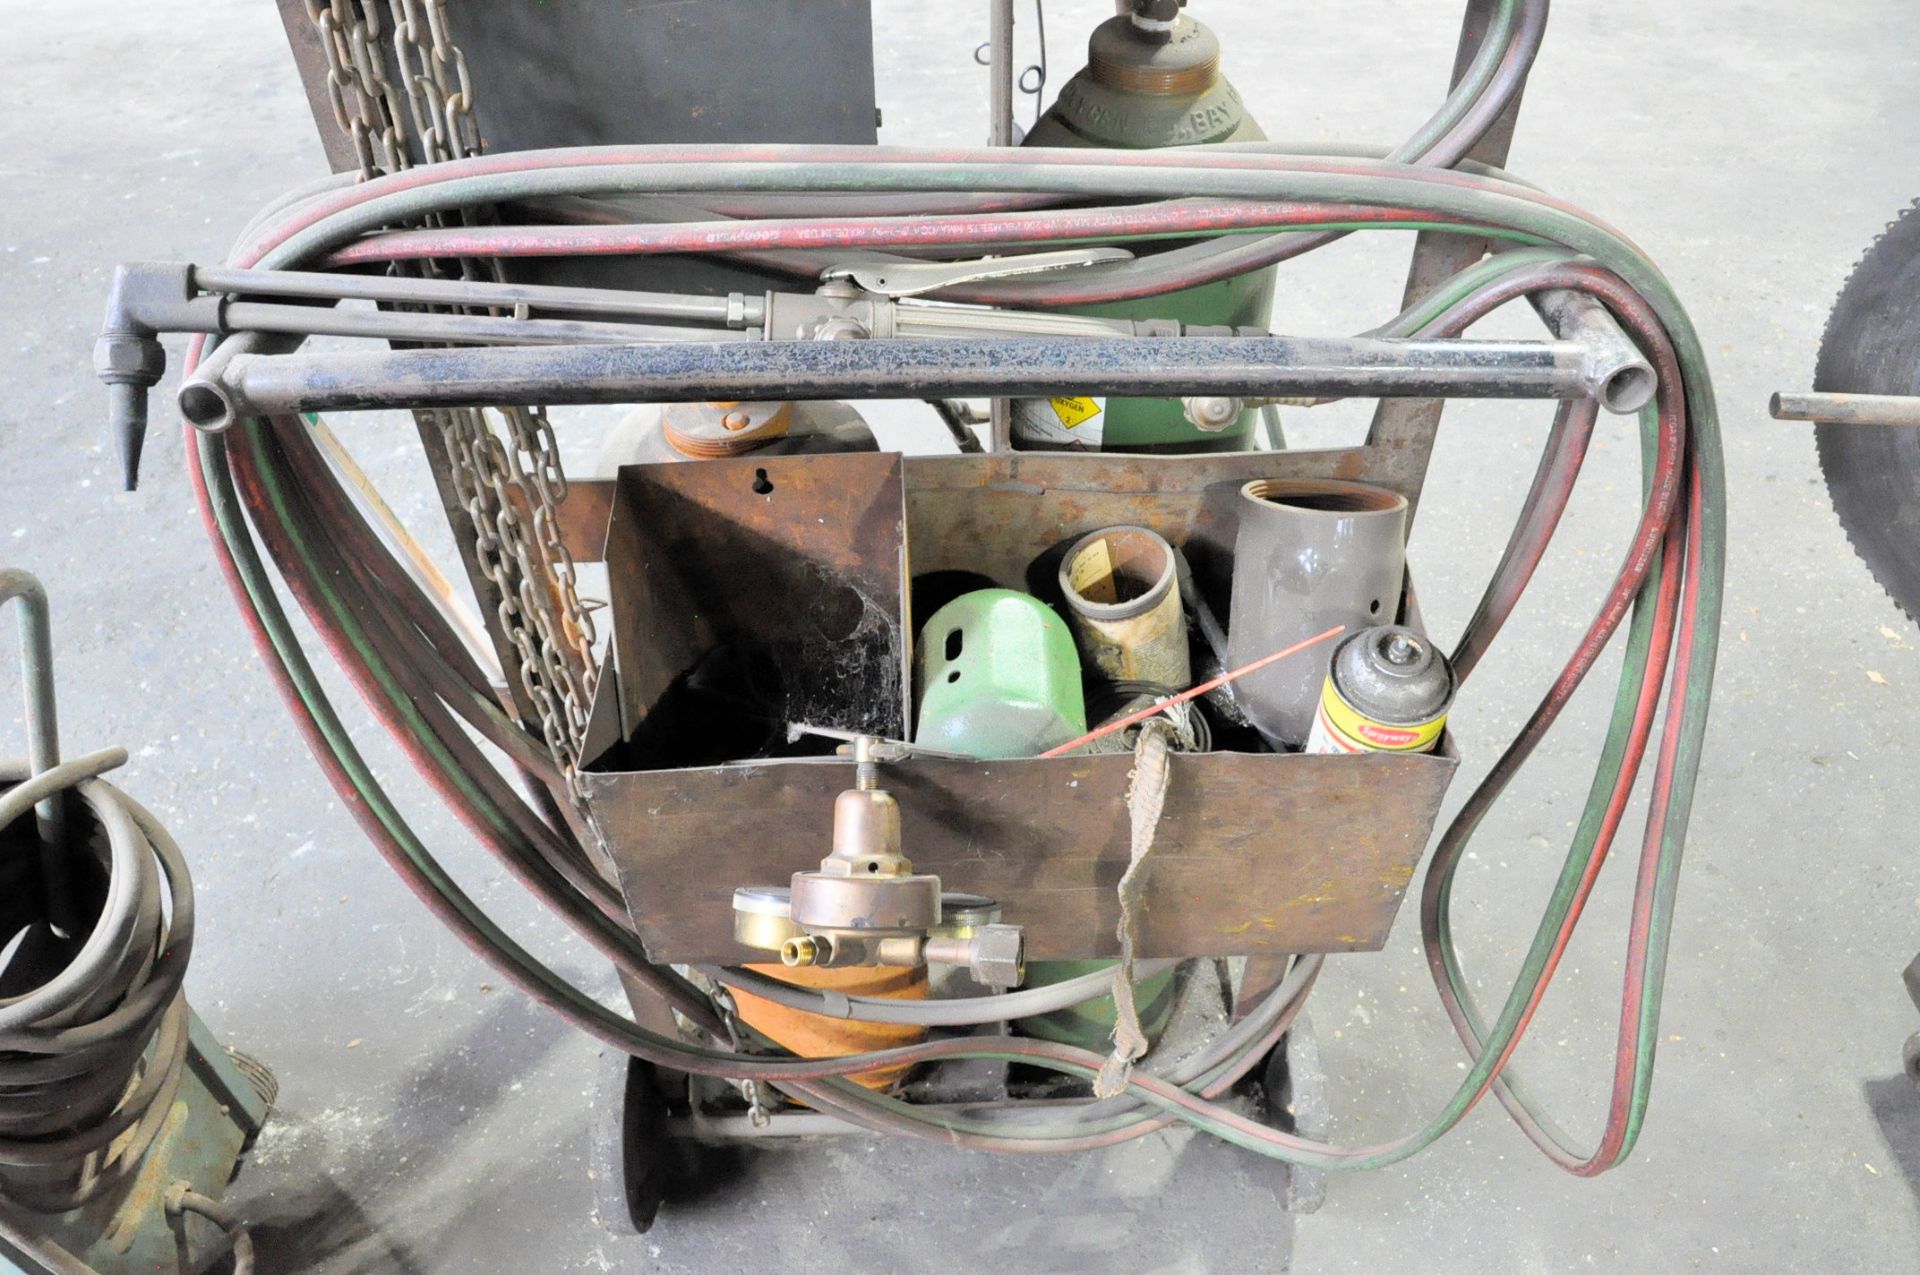 Oxygen/Acetylene Cart with Torch, Hoses, Gauges, and Tanks - Image 2 of 2